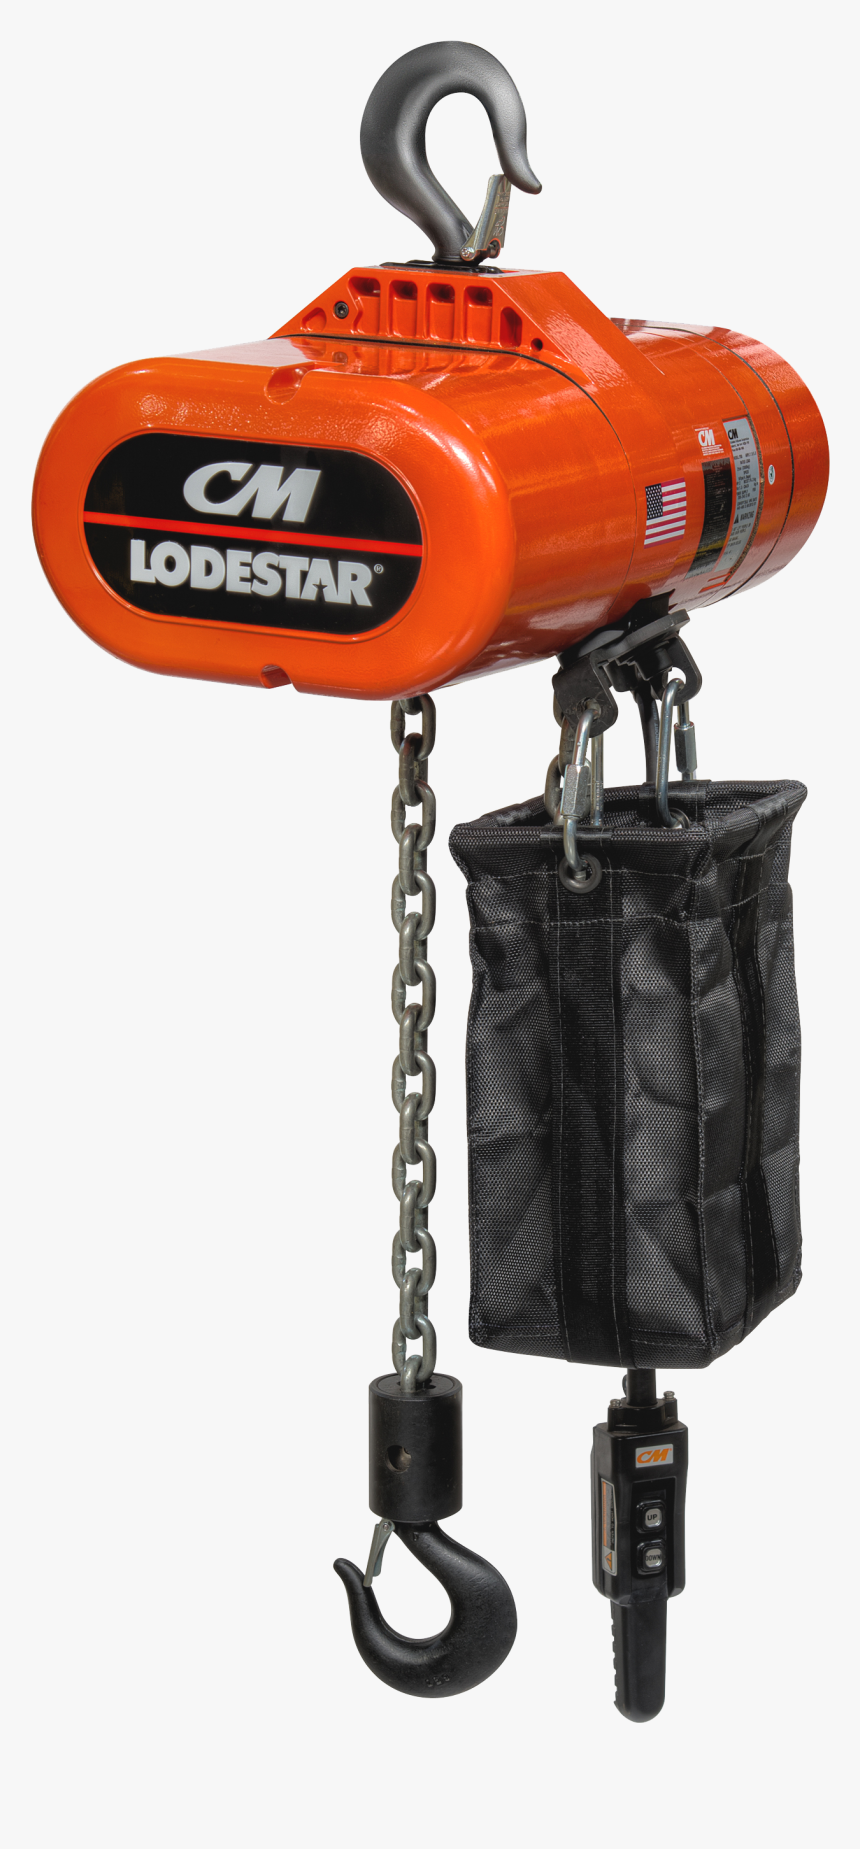 Cm Hoist - Electric Chain Cm Lodestar, HD Png Download, Free Download